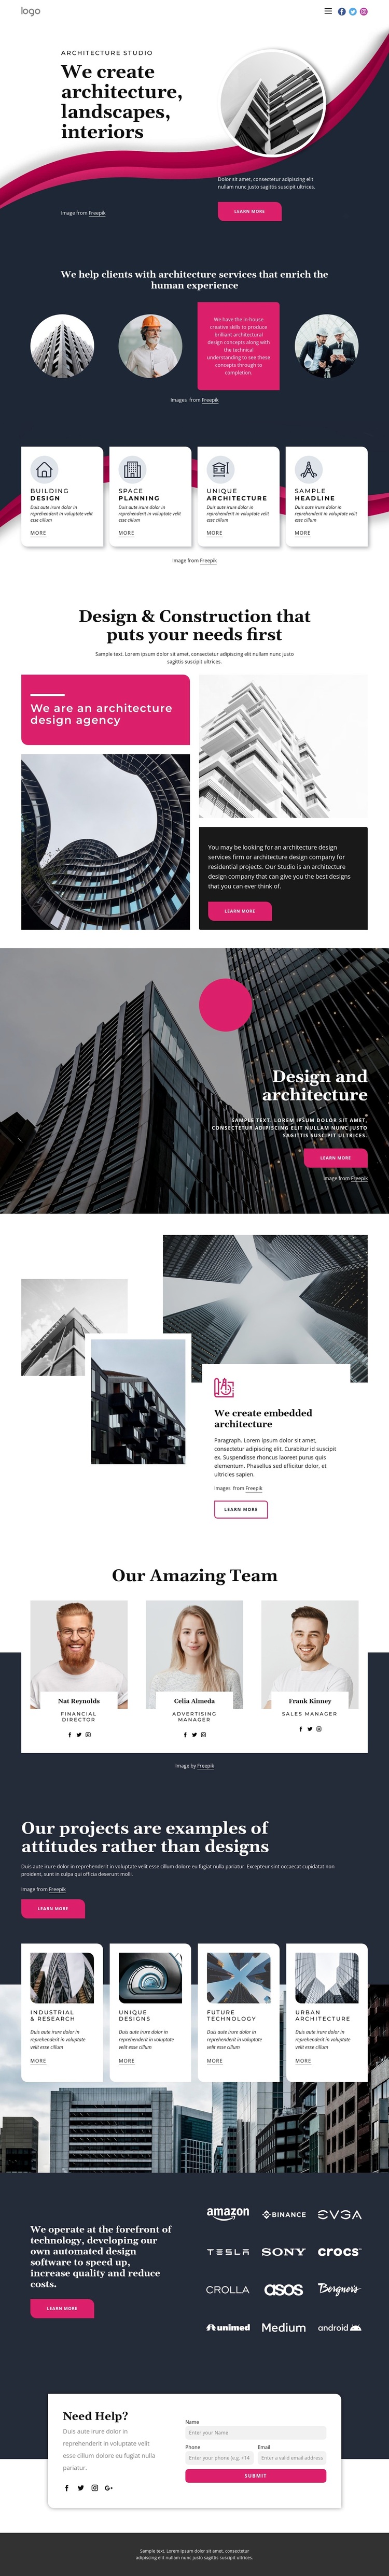 We create great architecture Template